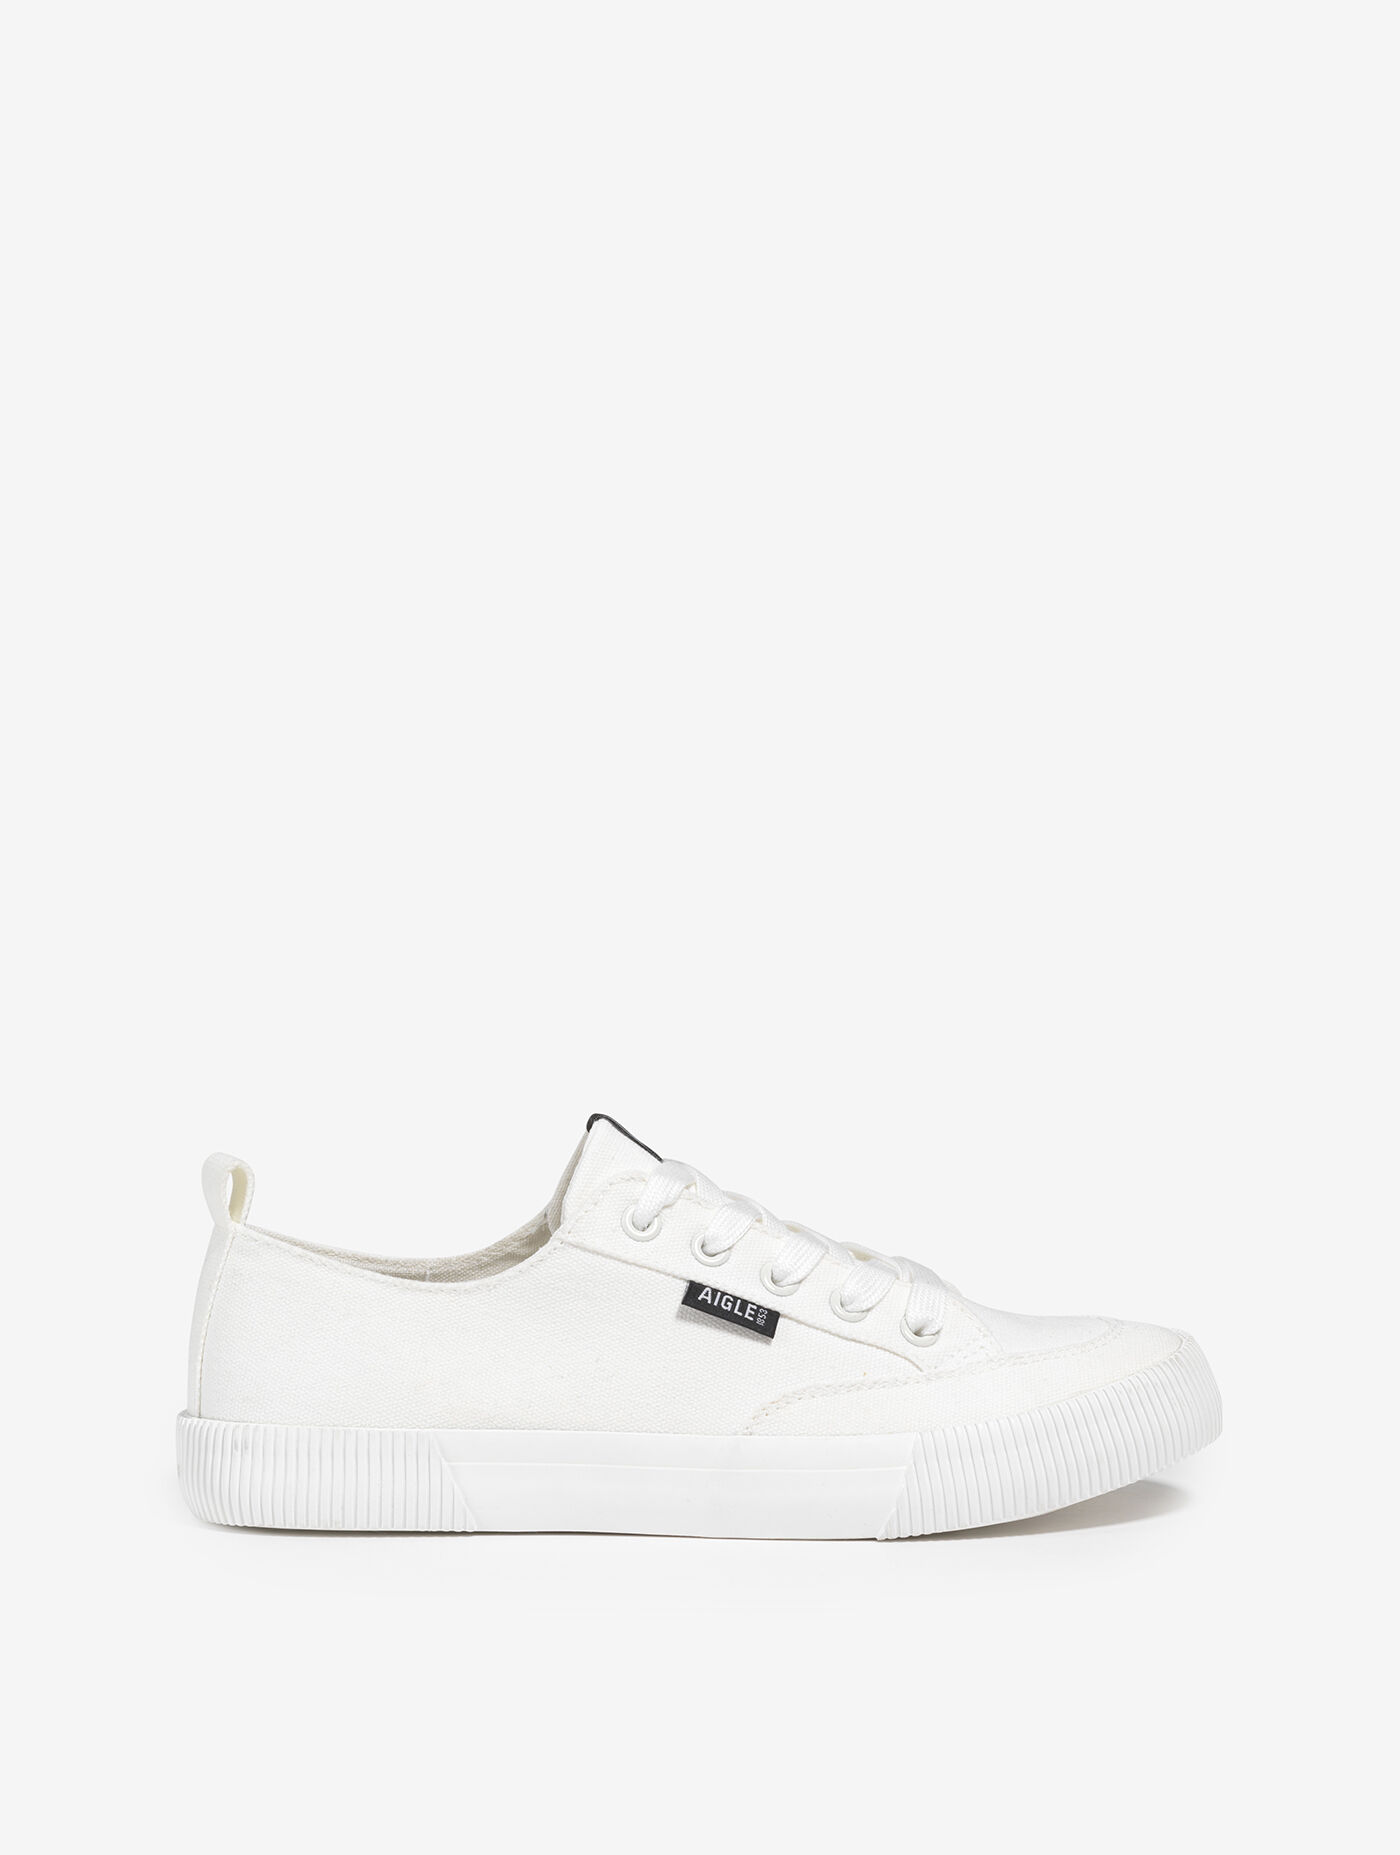 Buy Soviet Men White Sneakers - Casual Shoes for Men 7246274 | Myntra